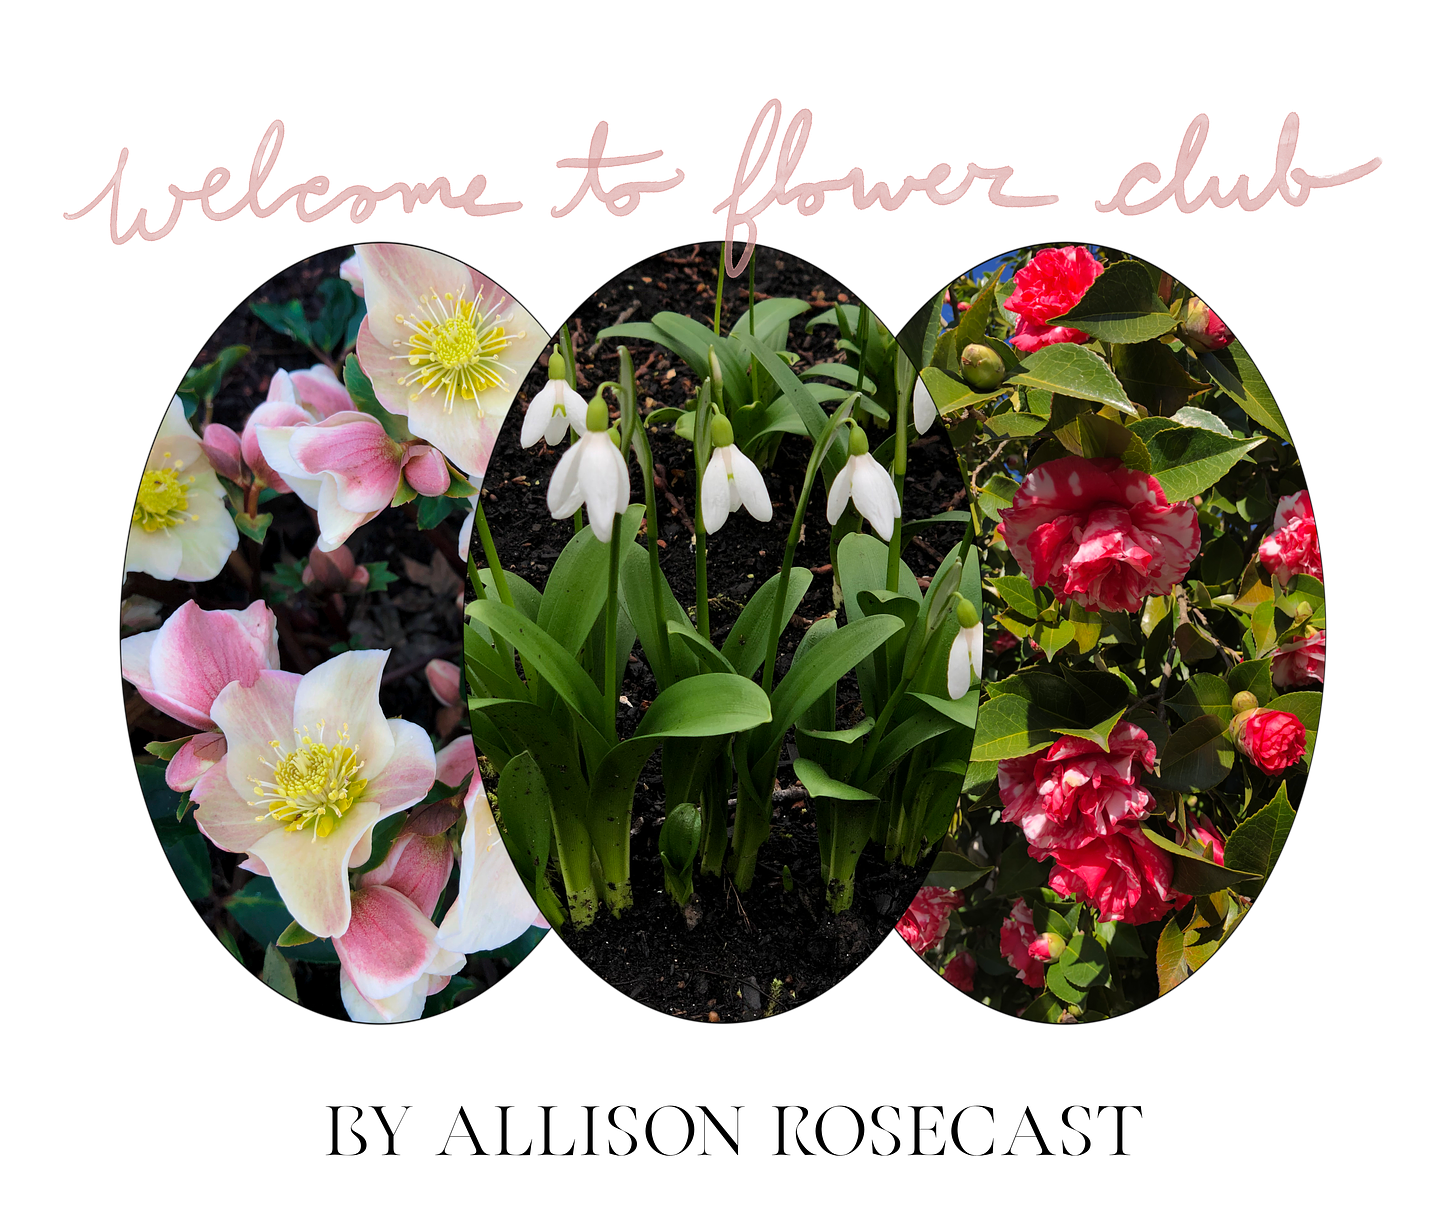 Text that says welcome to flower club by Allison Rosecast surrounded three oval photos of hellebore, snowdrops, and camellias.